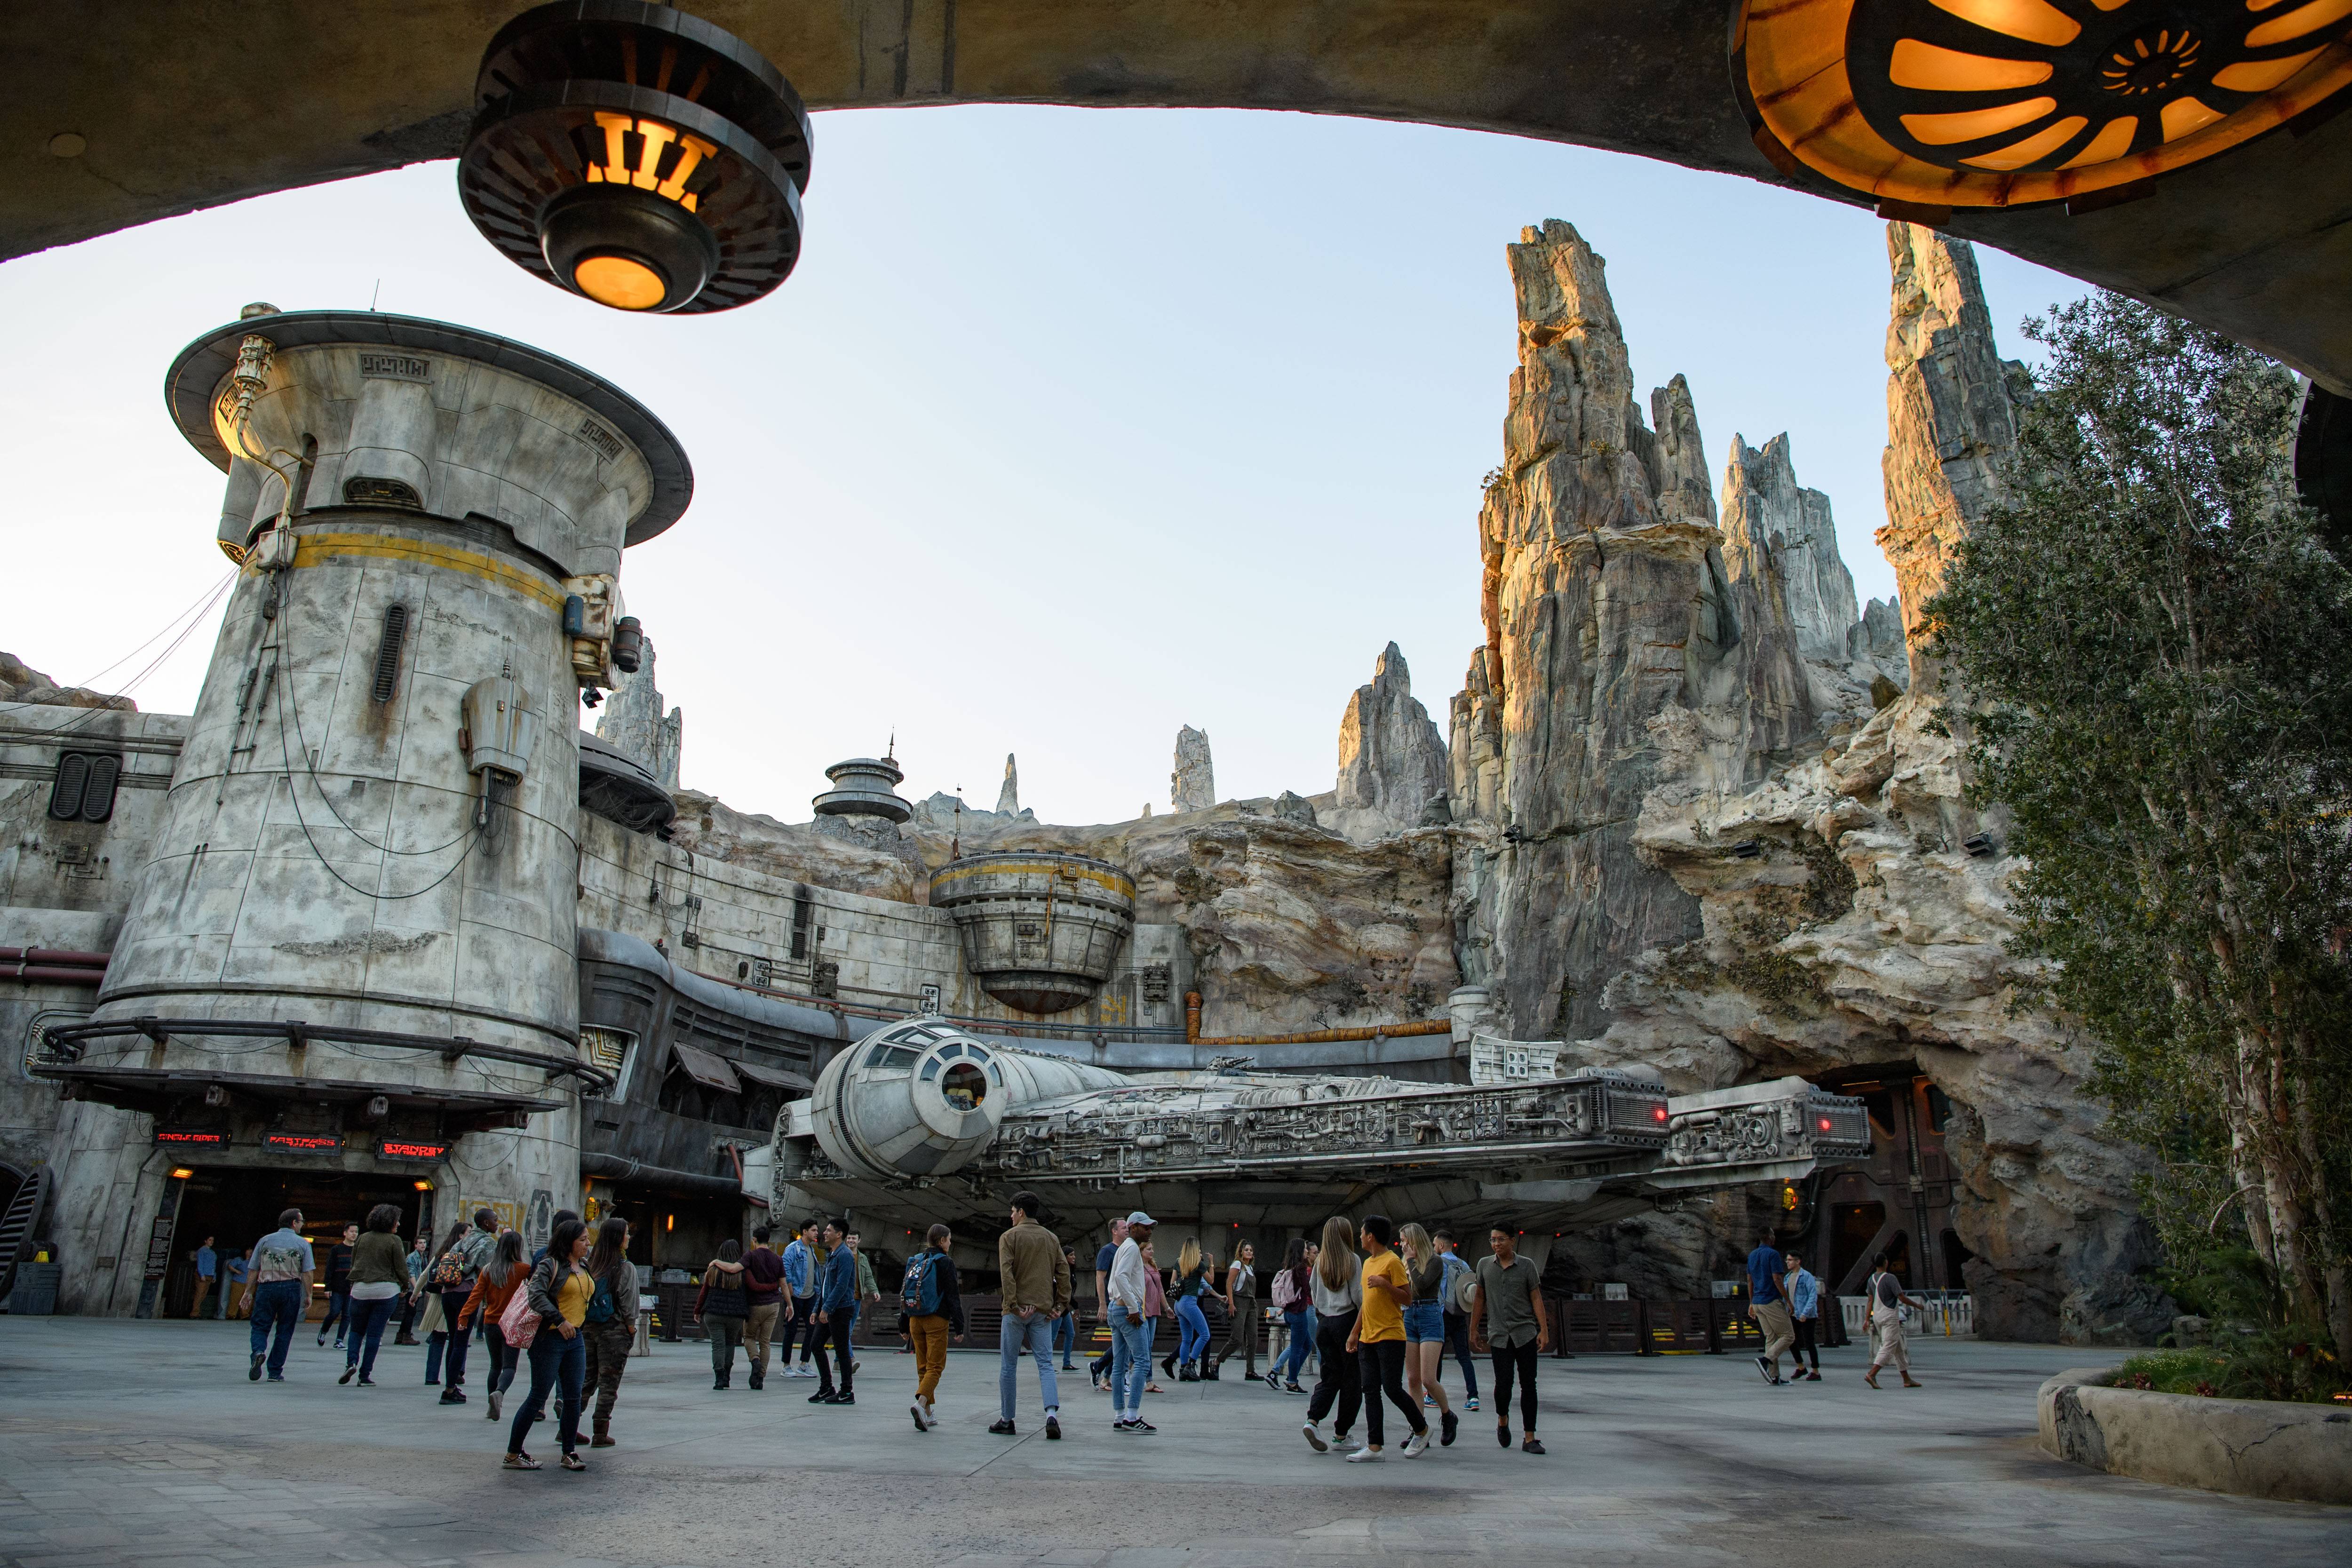 FastPass+ comes to Millennium Falcon: Smugglers Run at Disney's Hollywood Studios